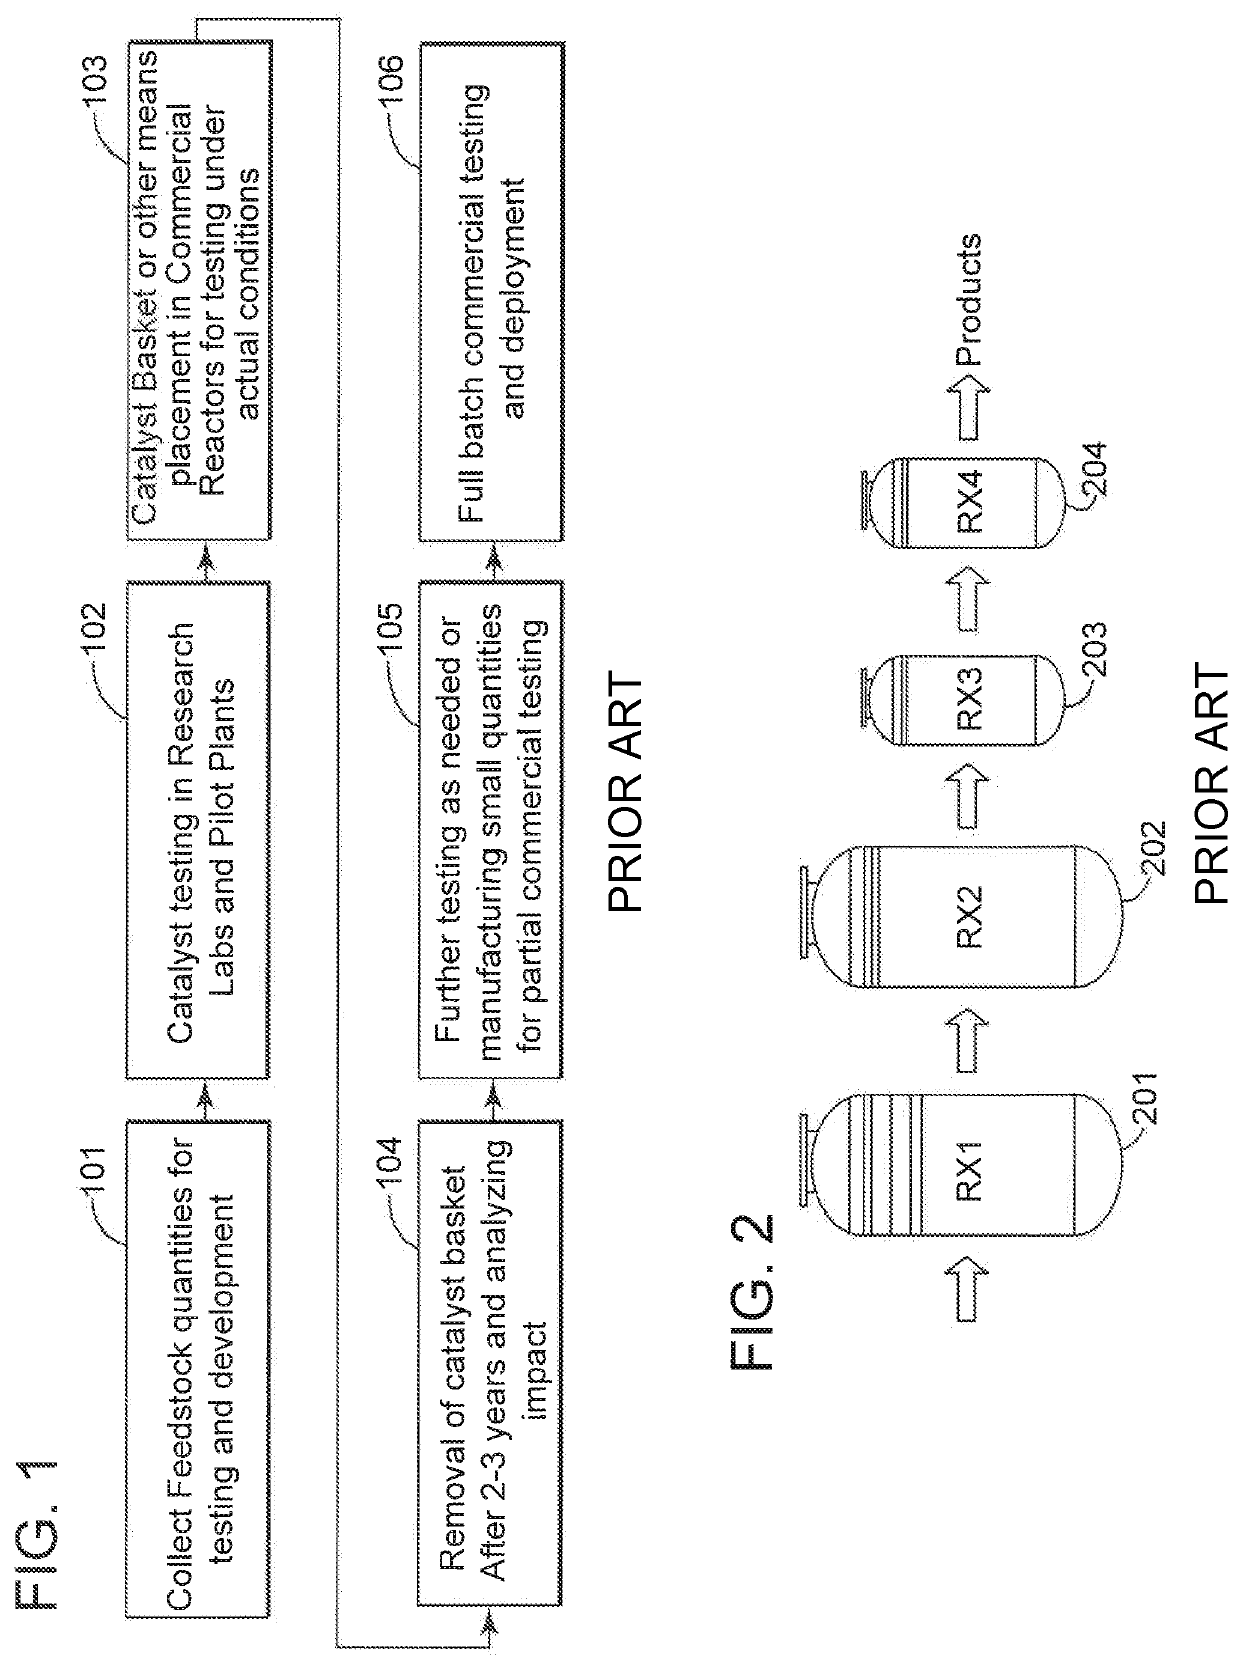 System and apparatus for testing and/or evaluating an industrial catalyst